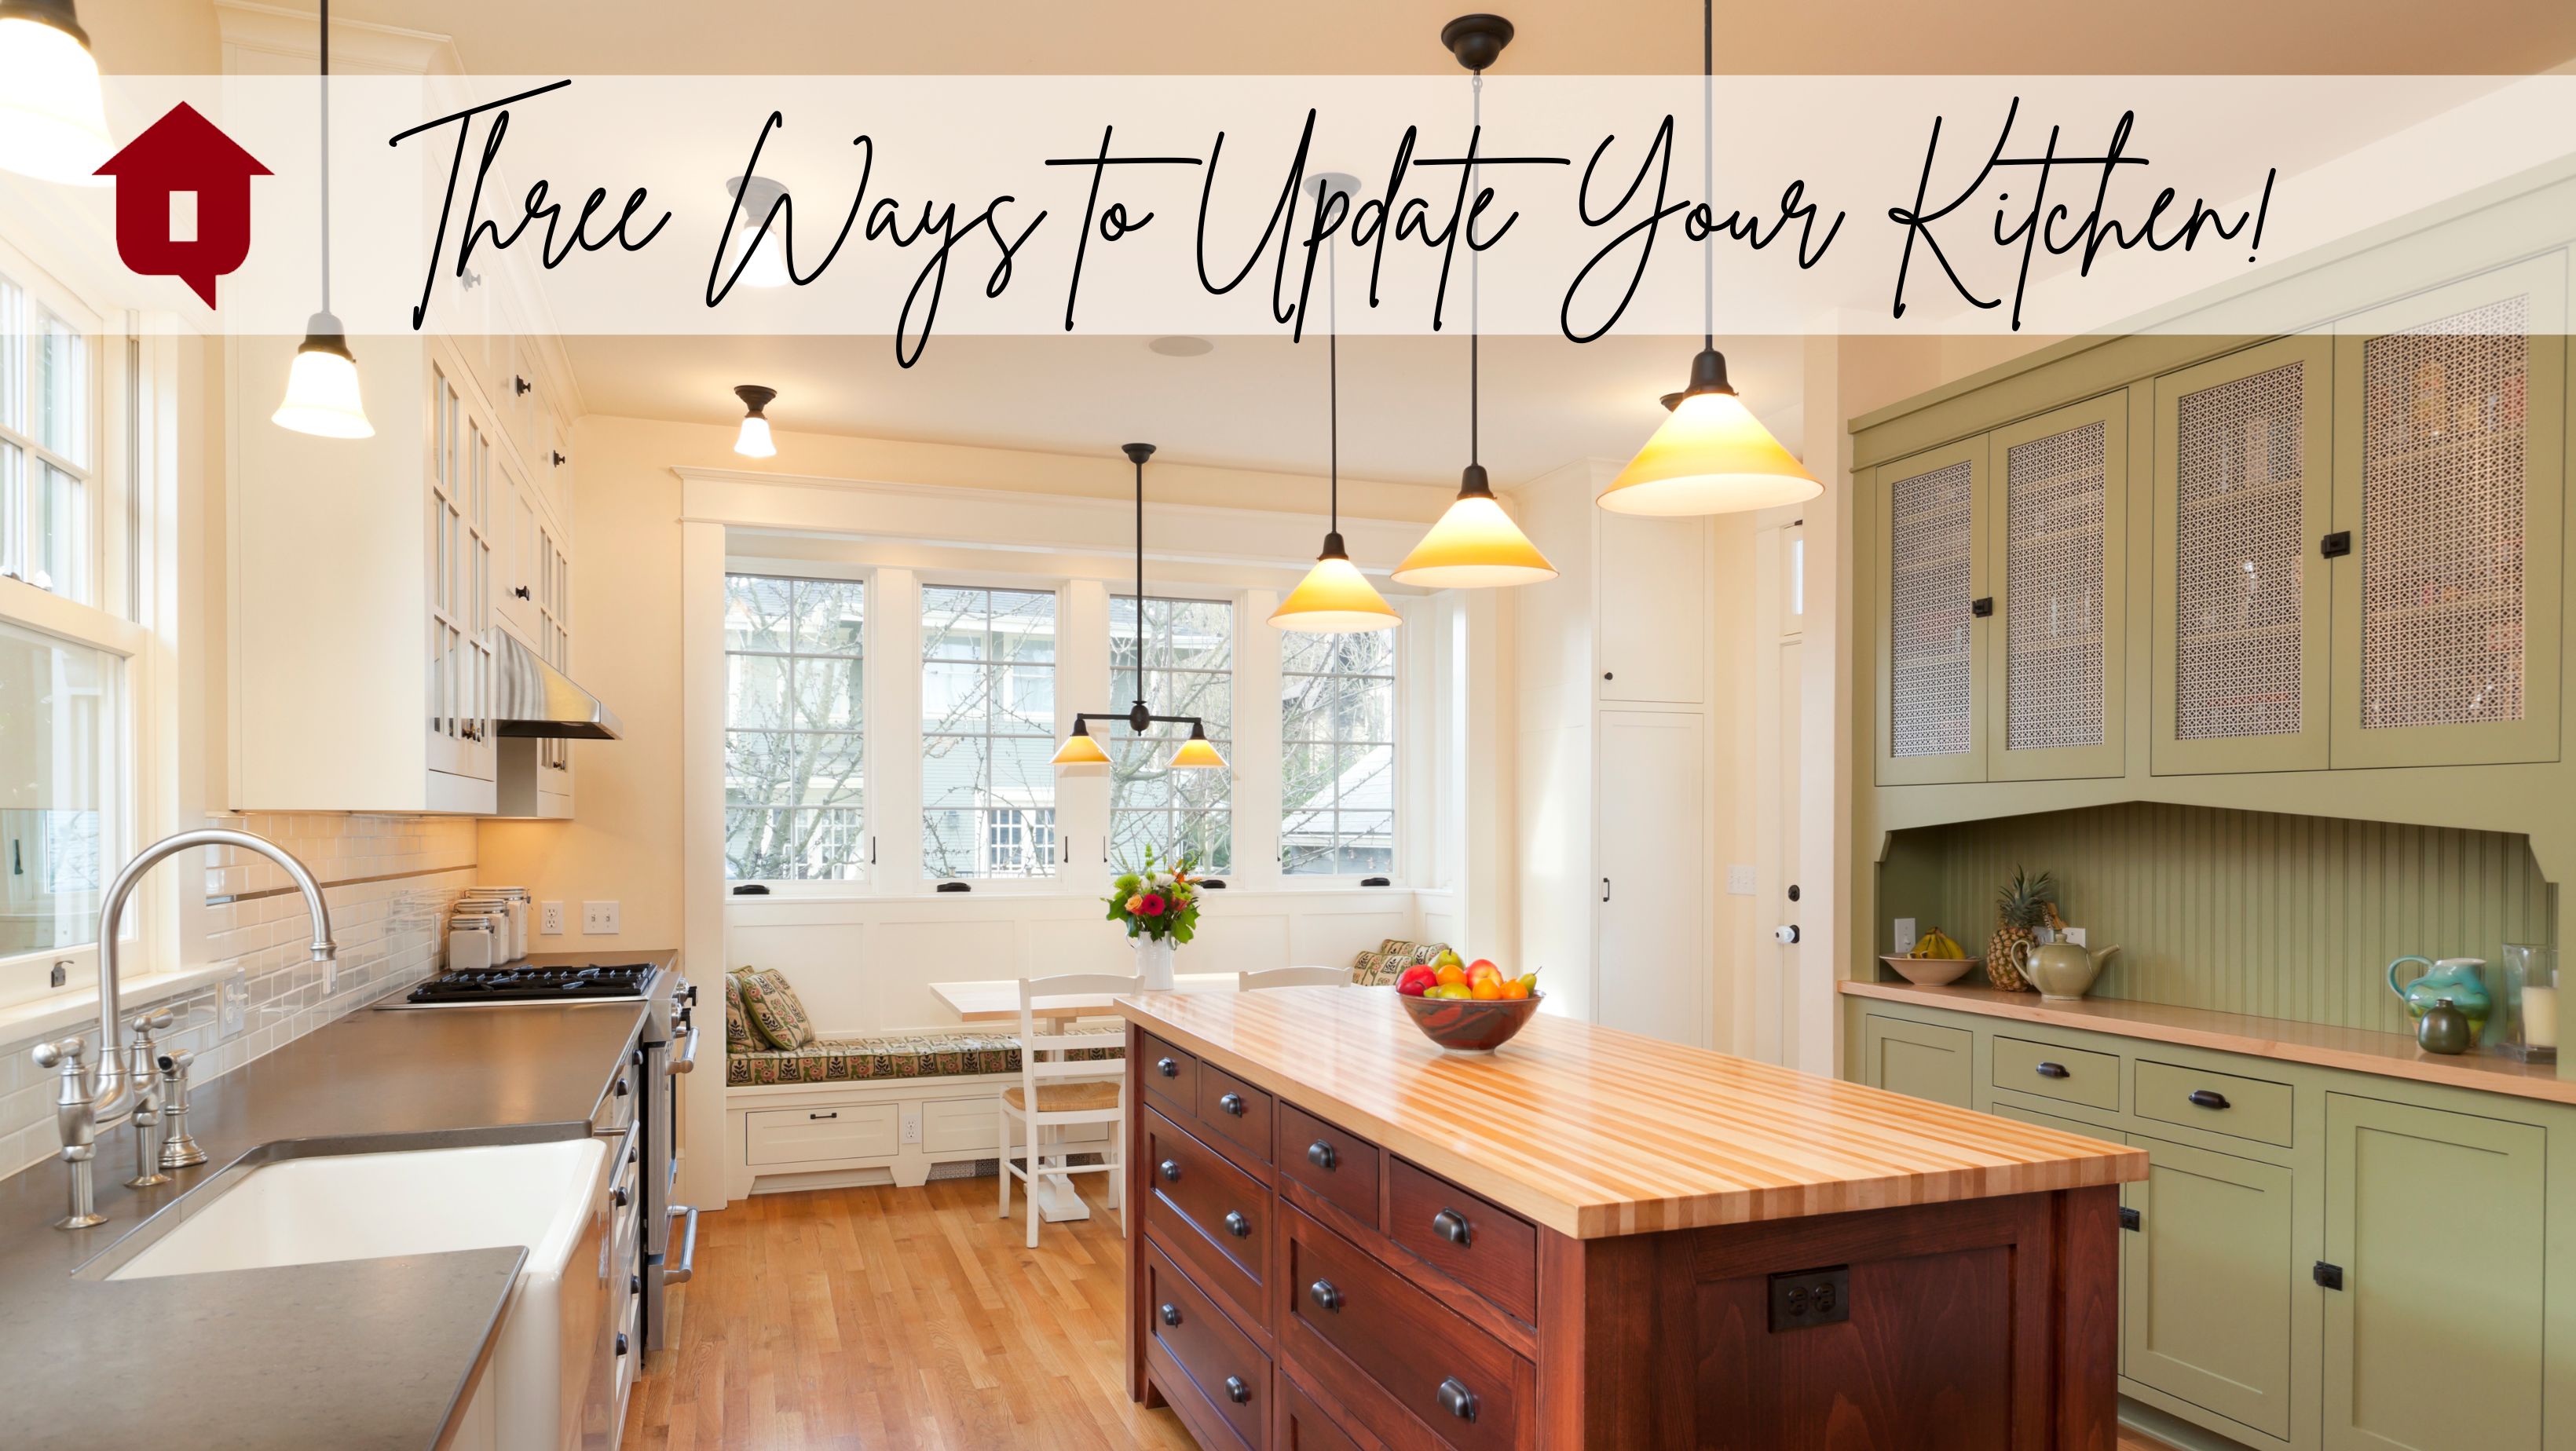 Three Easy and Practical Ways to Update Your Kitchen!